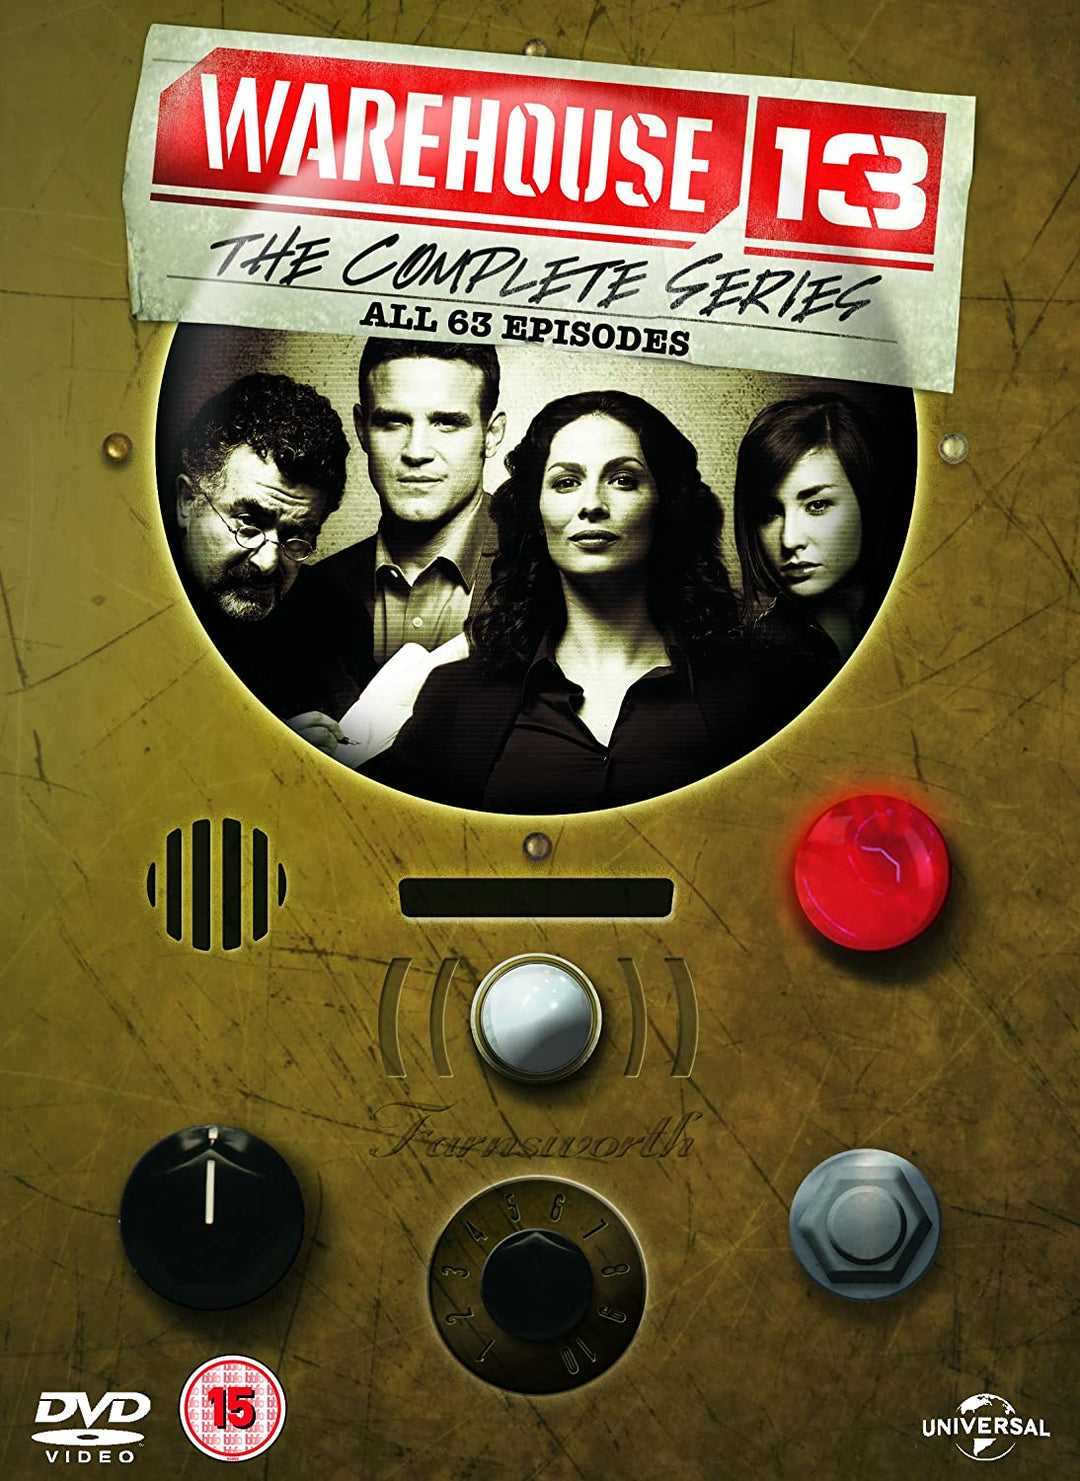 Warehouse 13 - The Complete Series [2009] - Sci-fi [DVD]